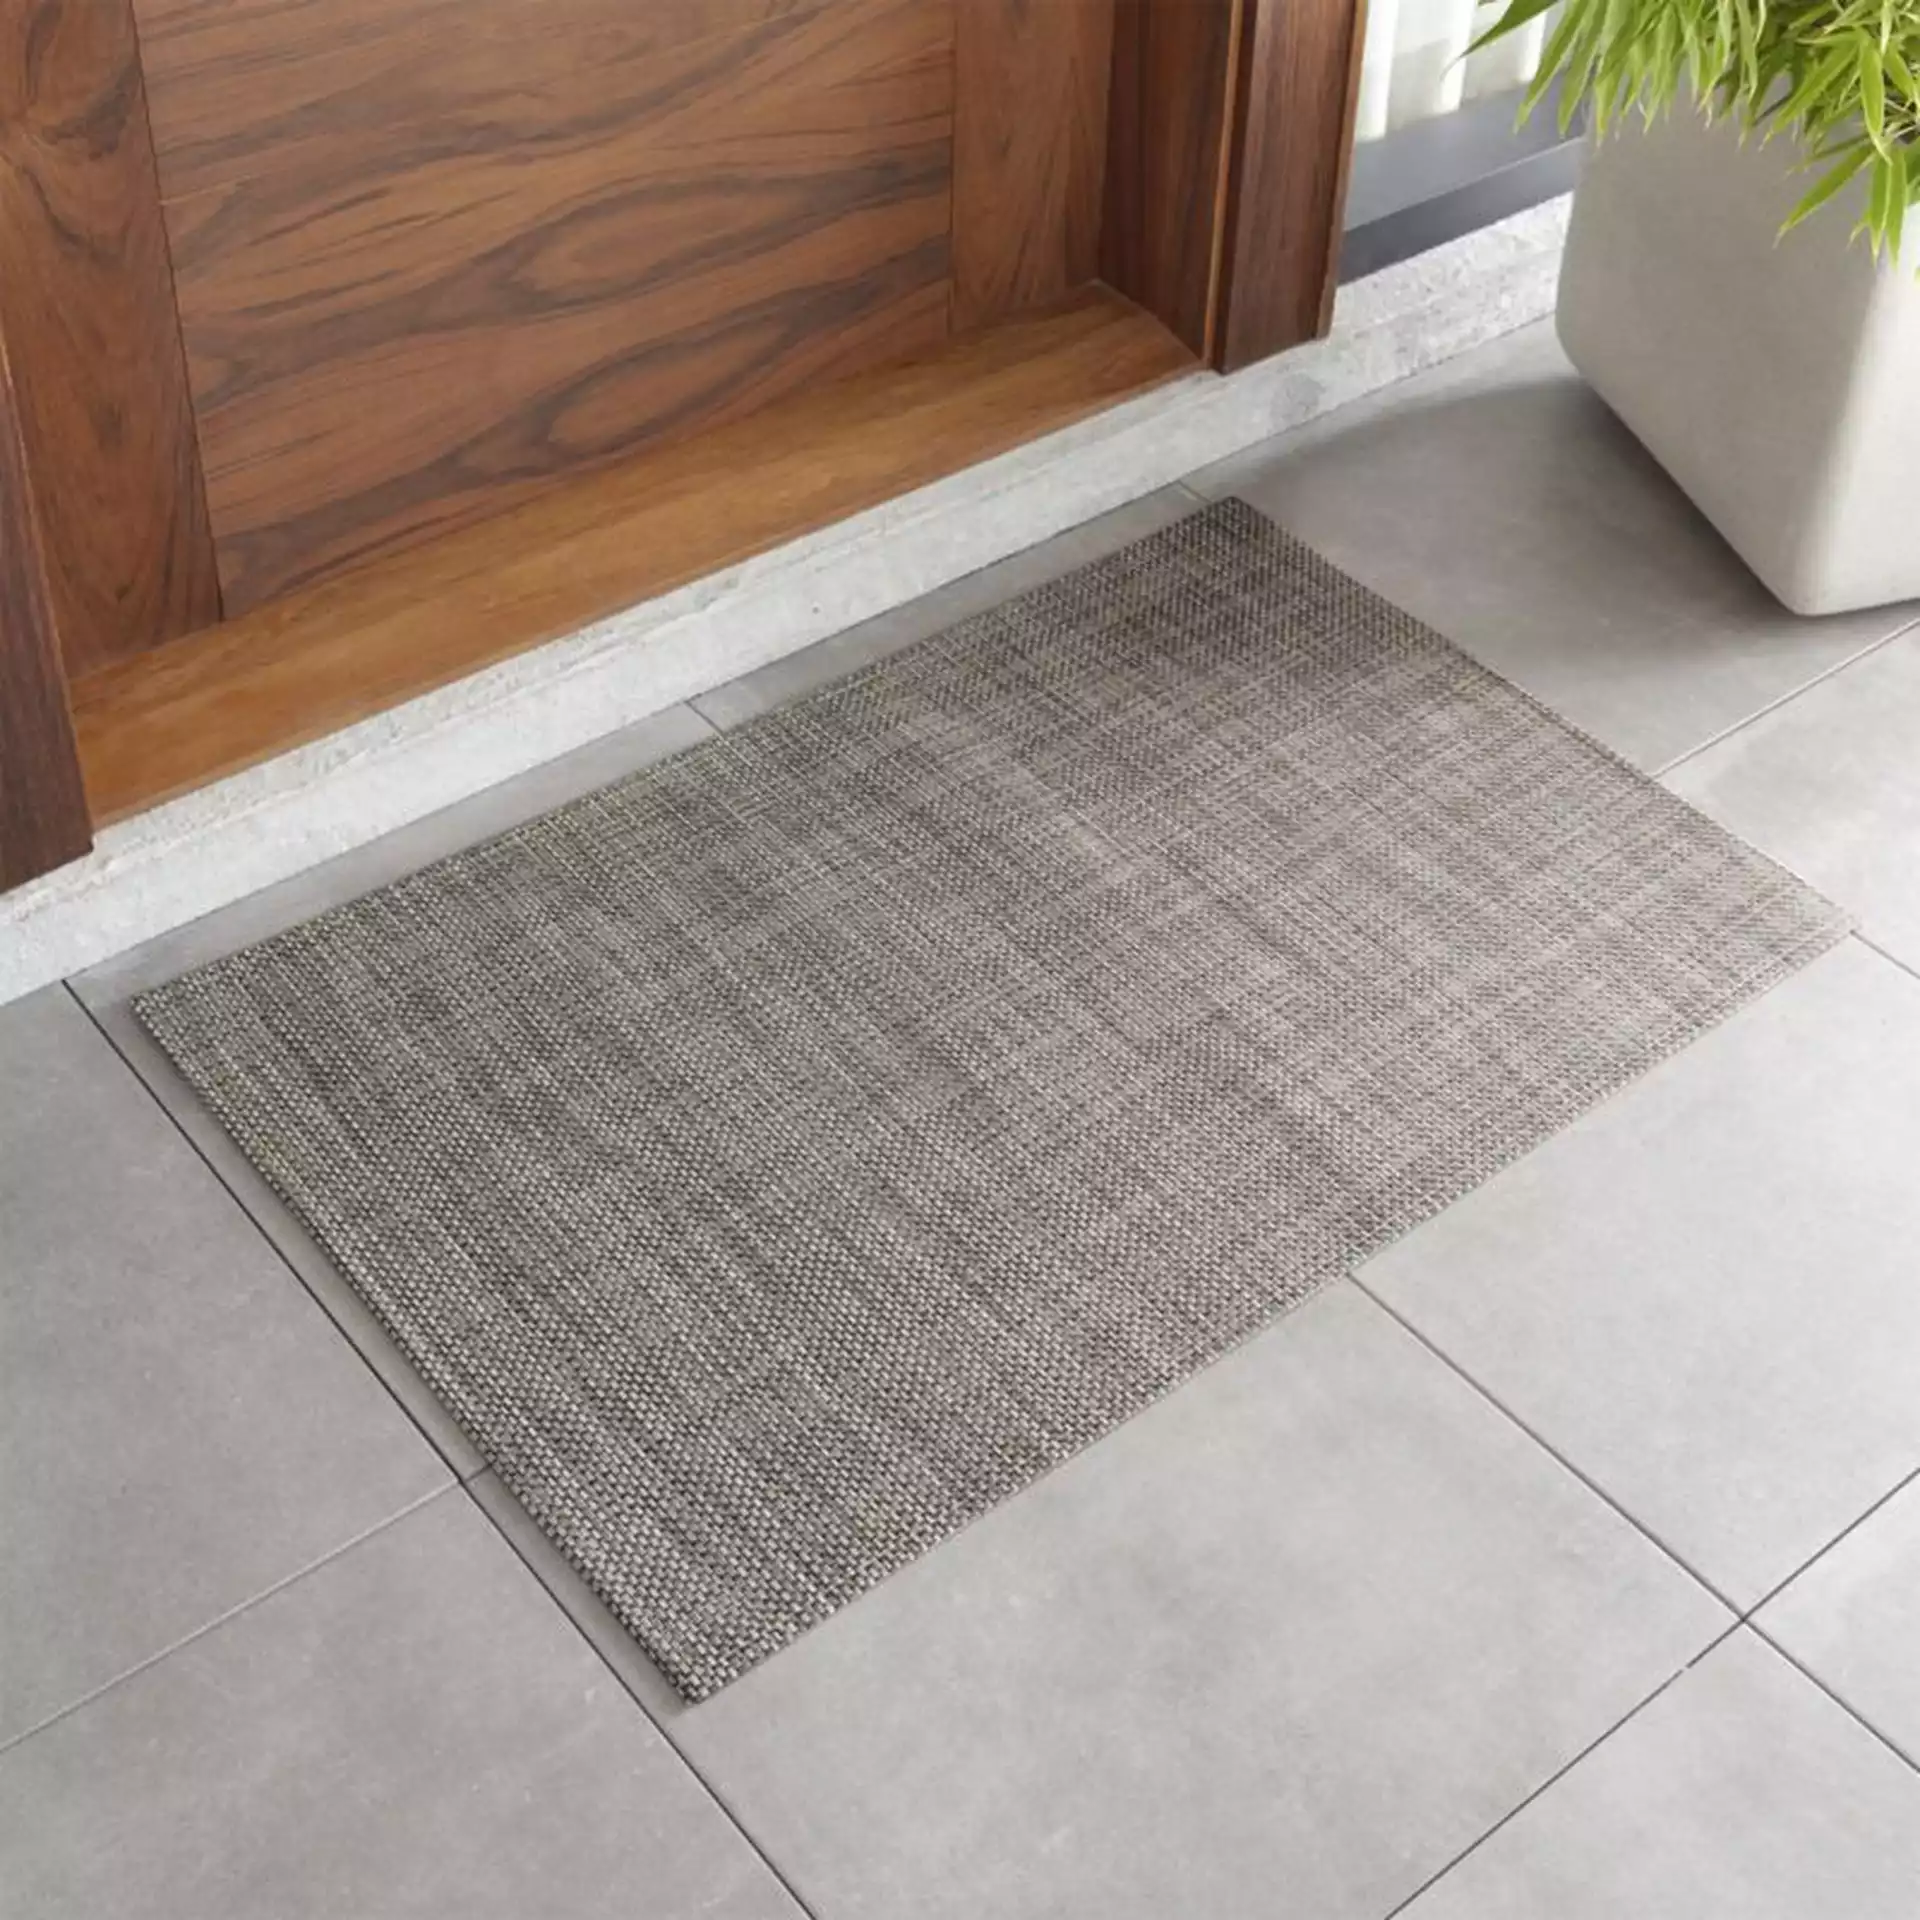 Chilewich ® Basketweave Oyster Woven Floormat 26"x72"